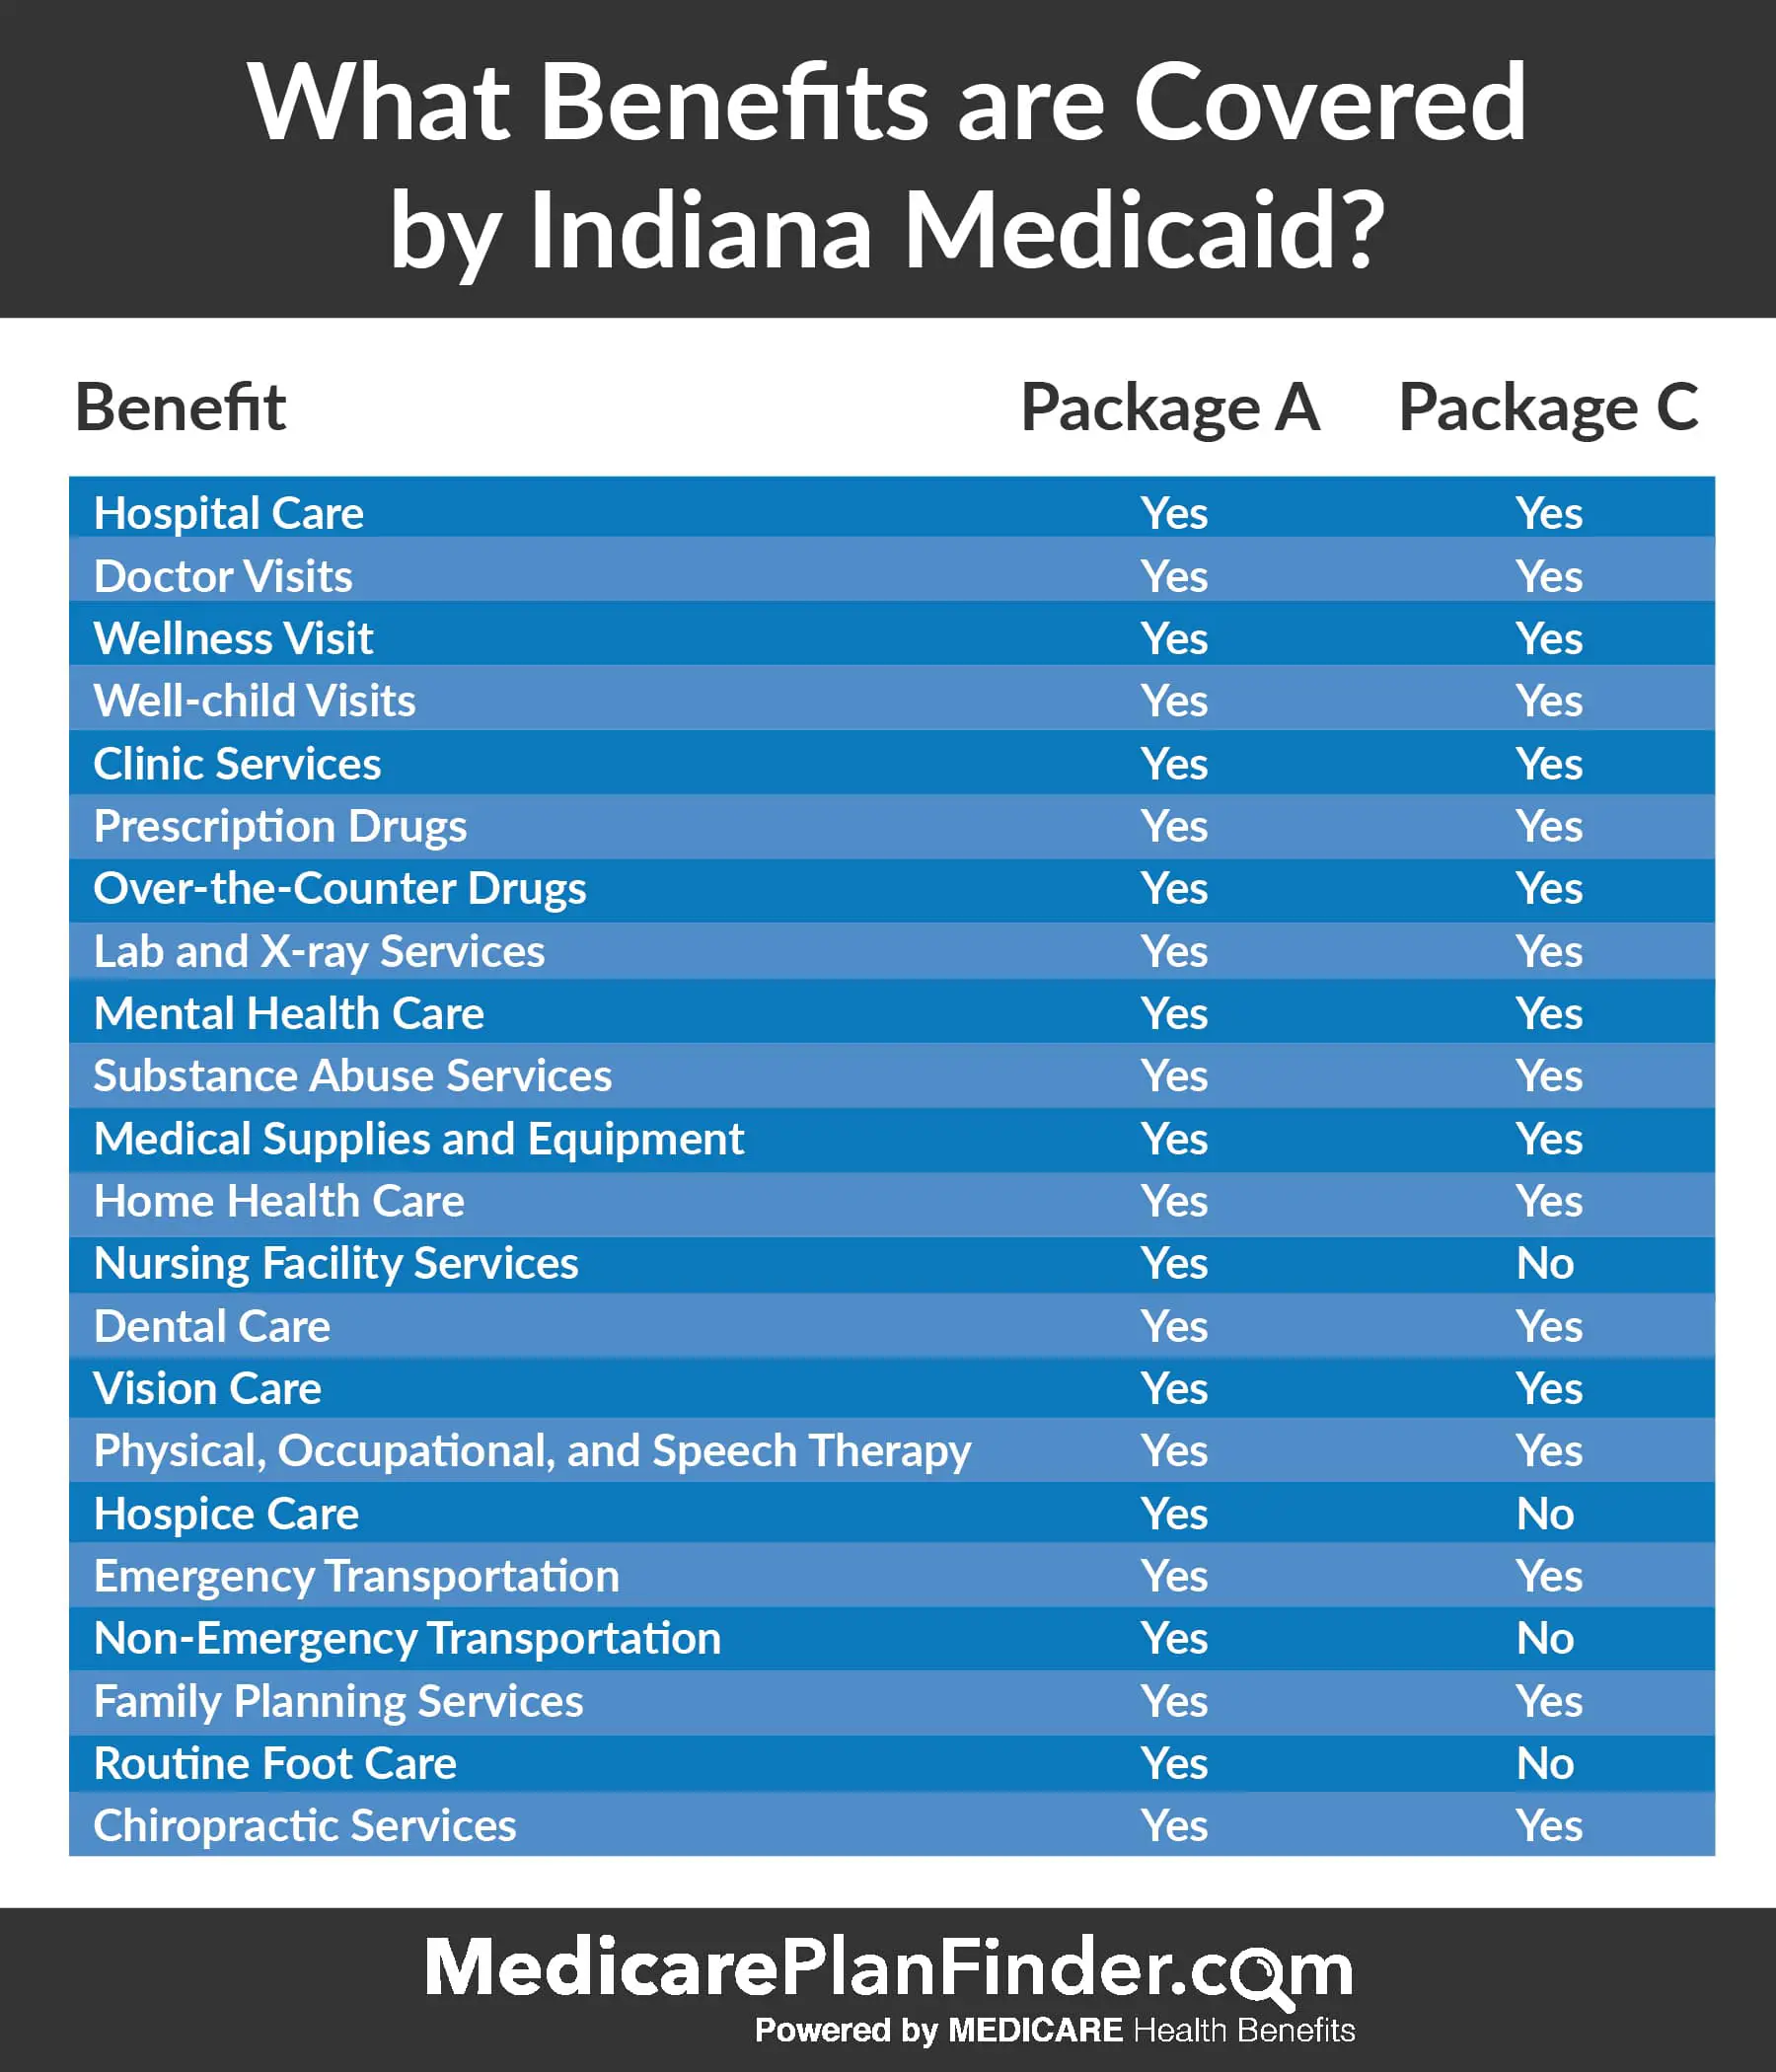 Indiana Medicaid: Ultimate Consumer Guide